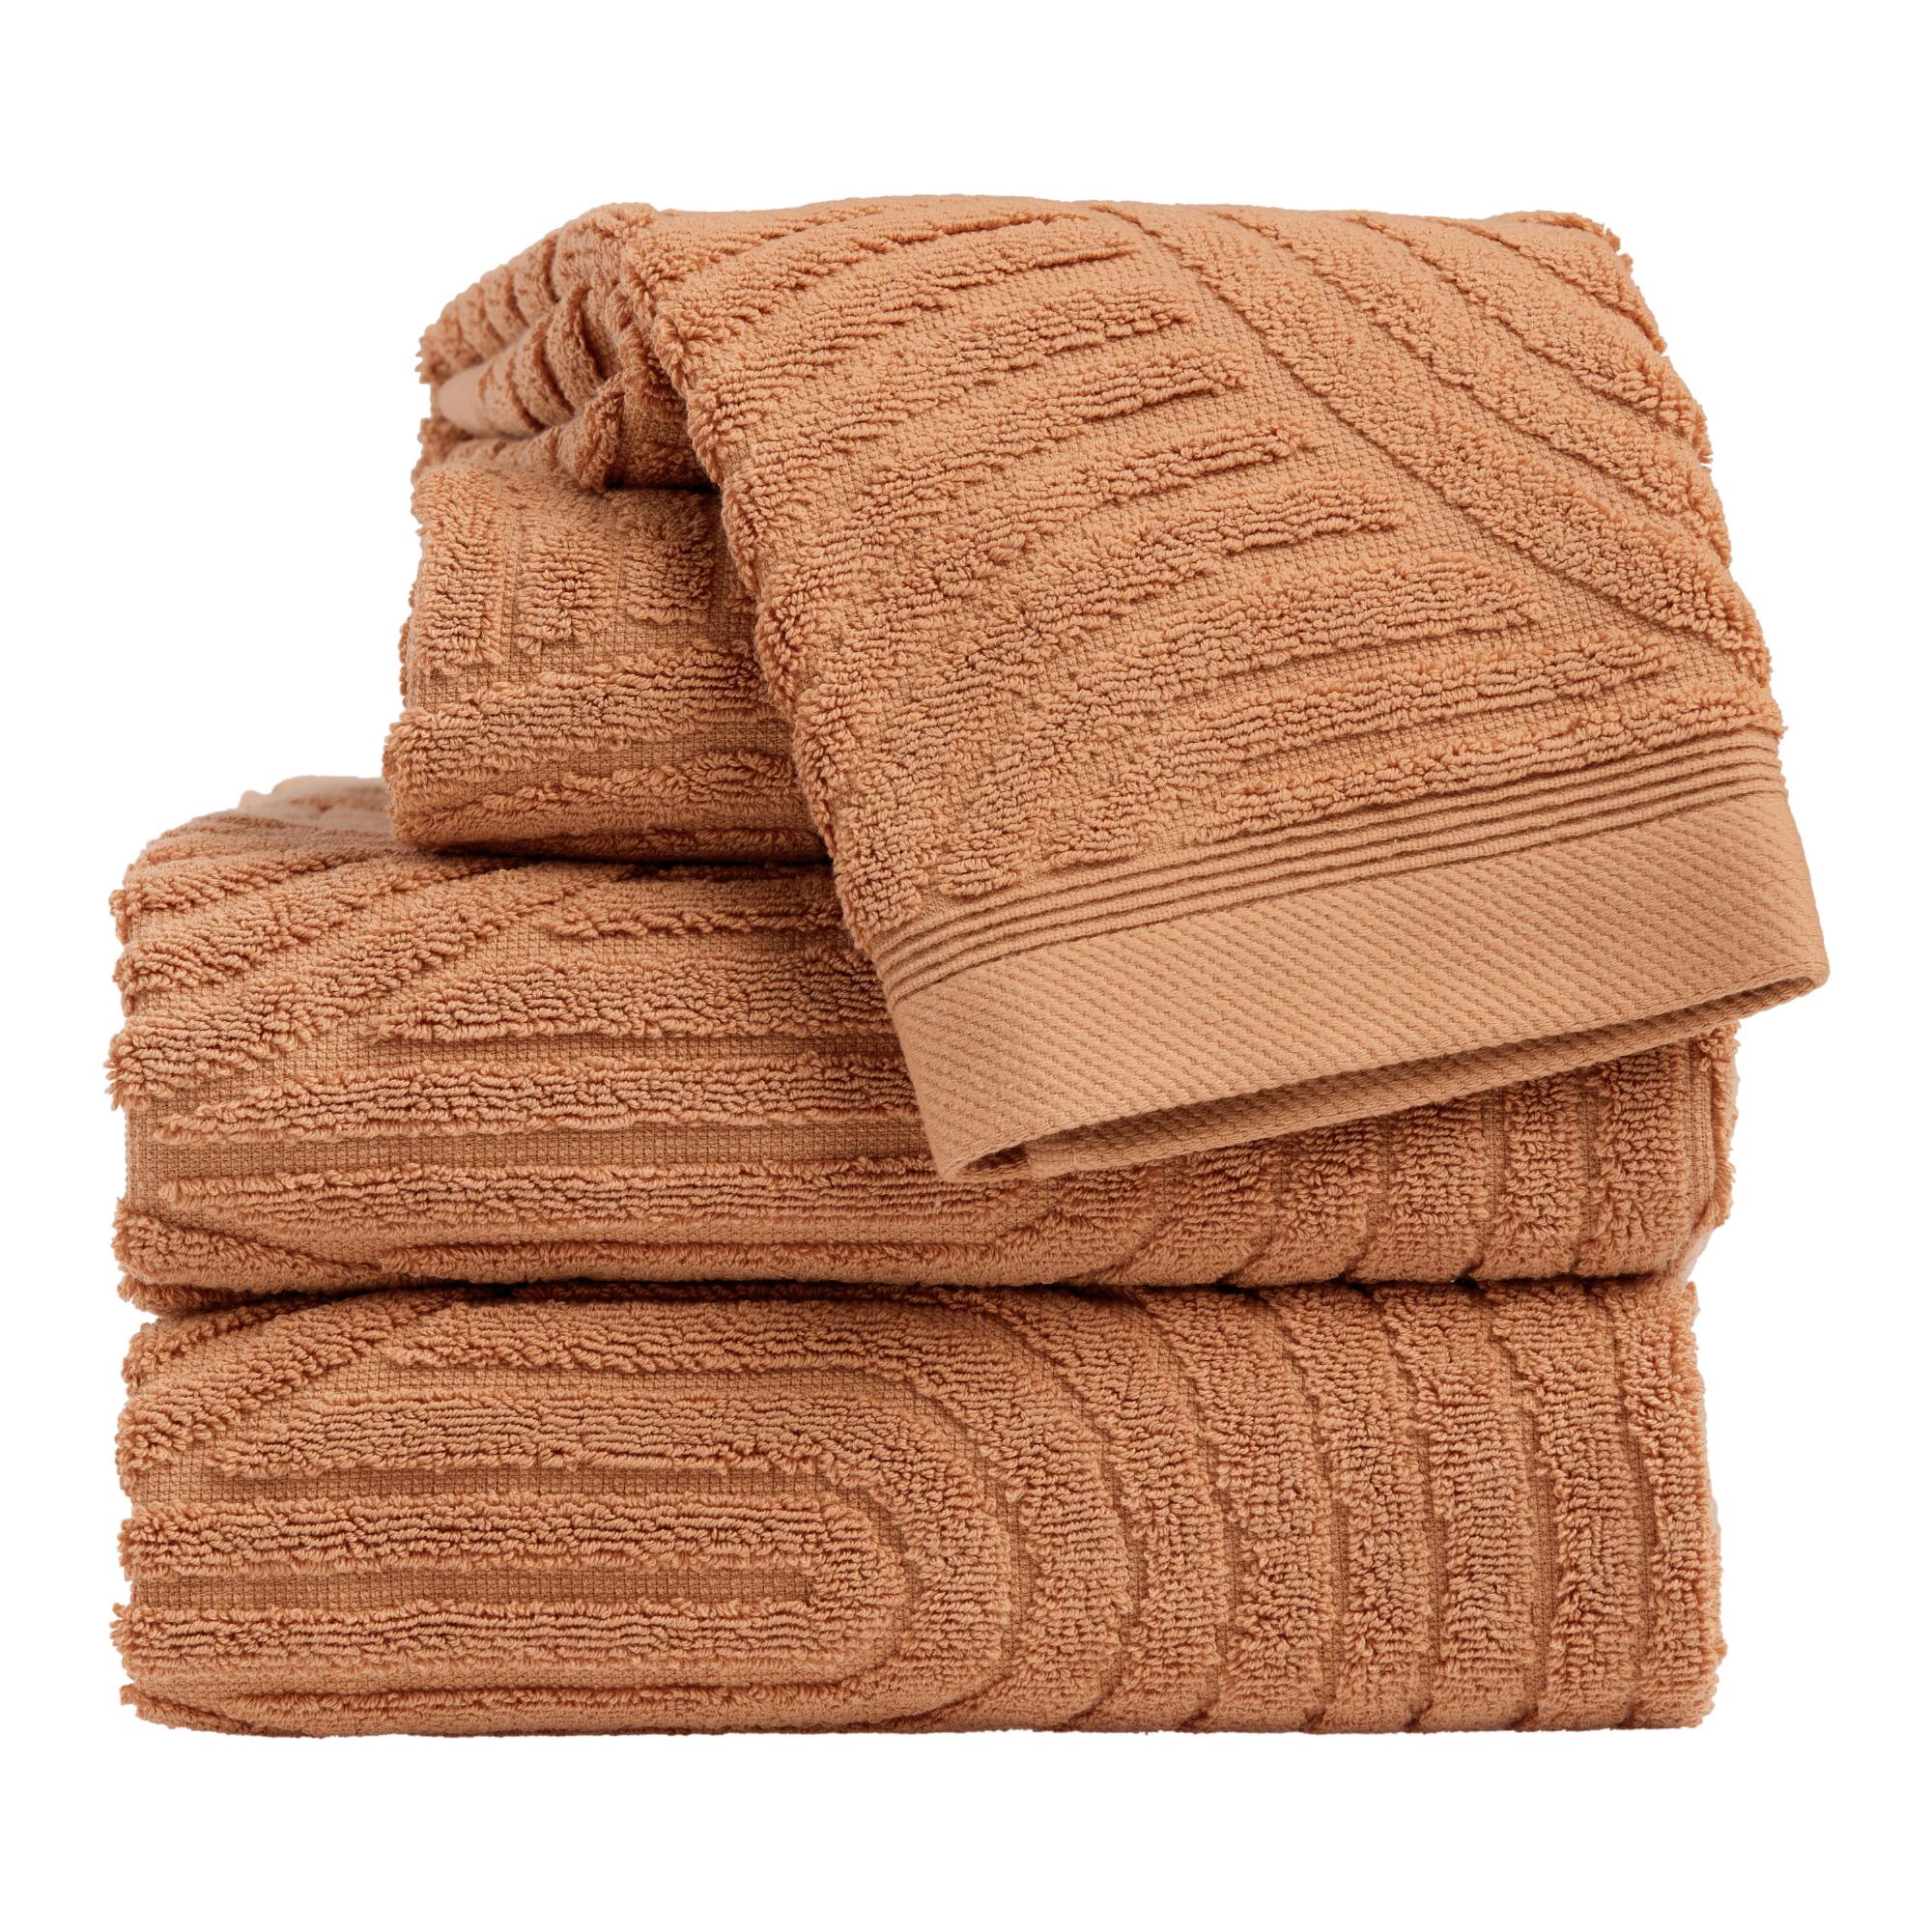 Hazel Brown Sculpted Arches Towel Collection by World Market